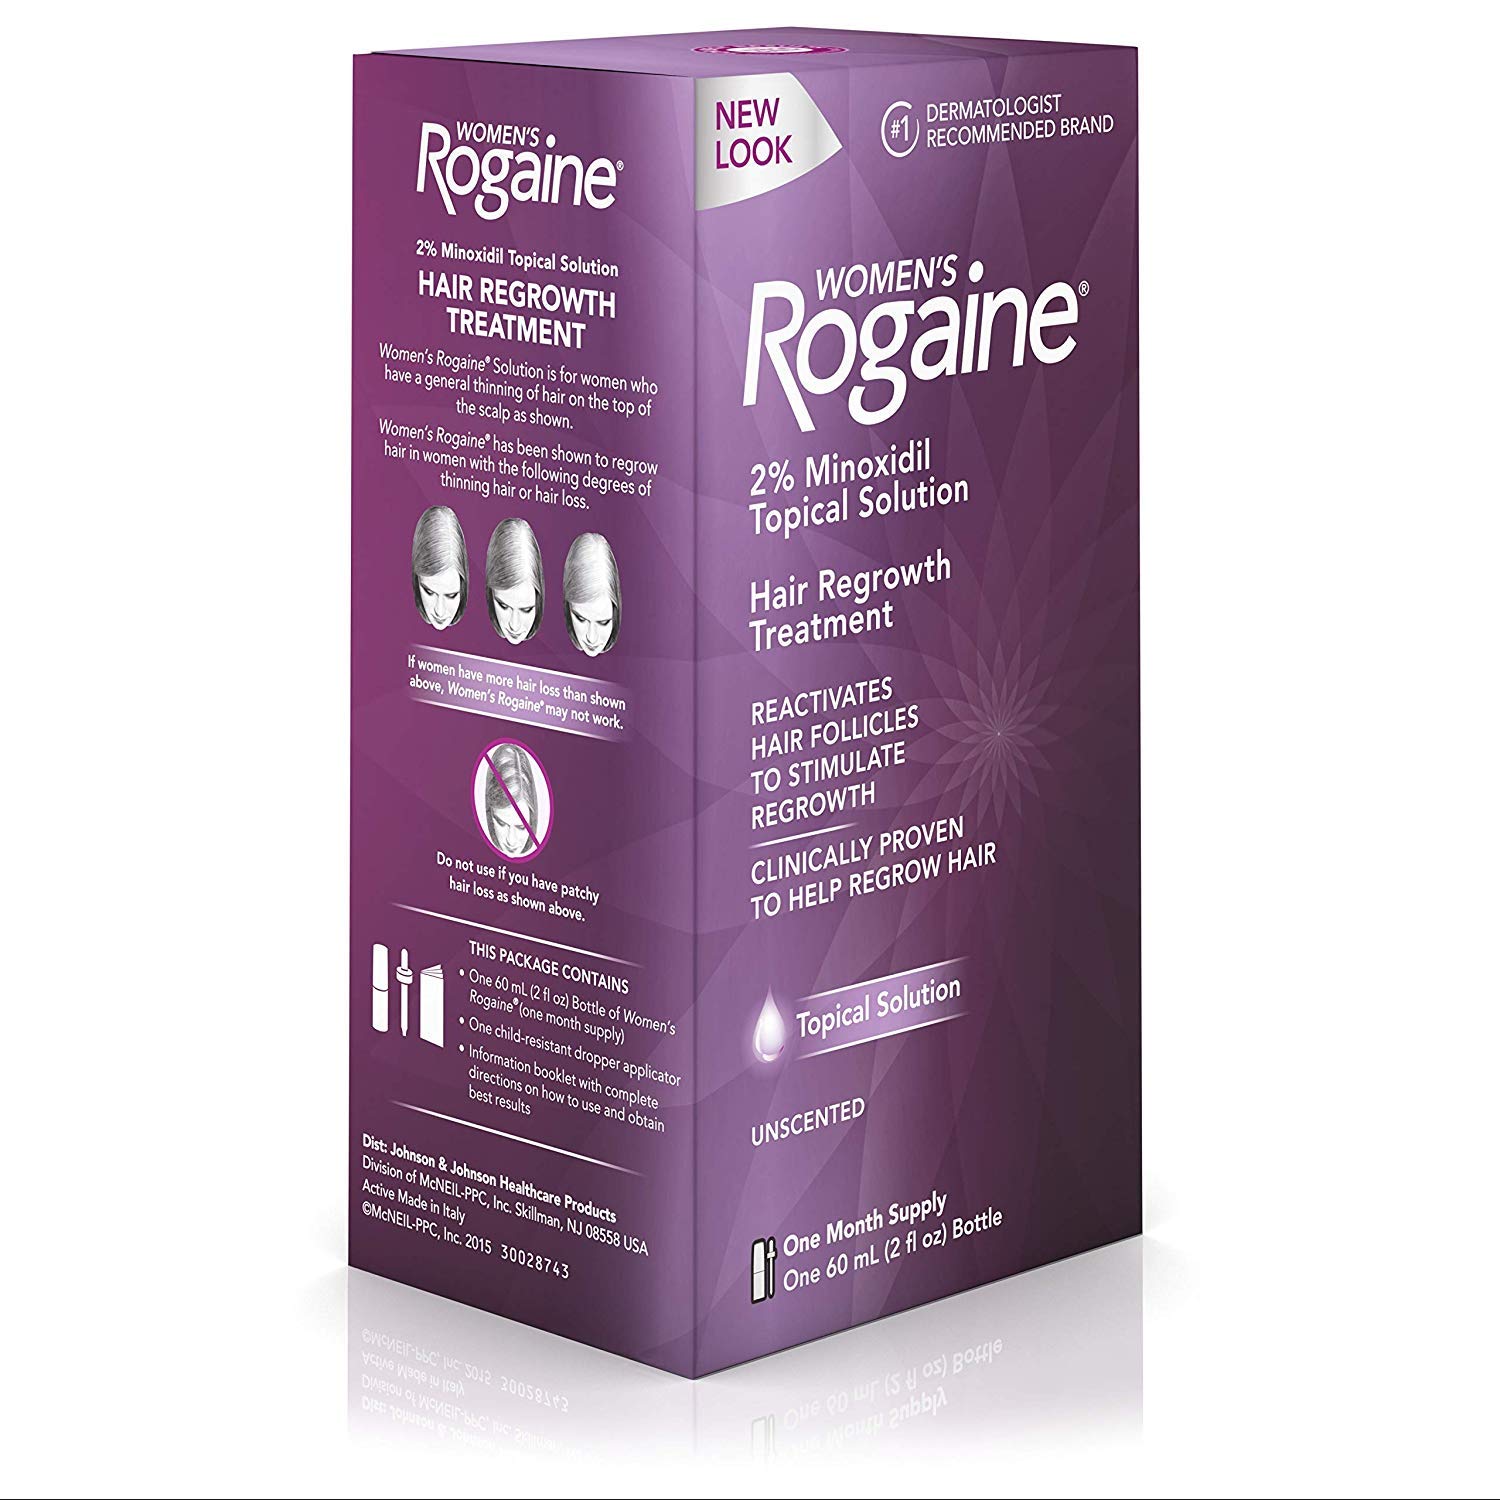 Mua Women's Rogaine 2% Minoxidil Topical Solution for Hair Thinning and Loss,  Topical Treatment for Women's Hair Regrowth, 1-Month Supply trên Amazon Mỹ  chính hãng 2023 | Fado